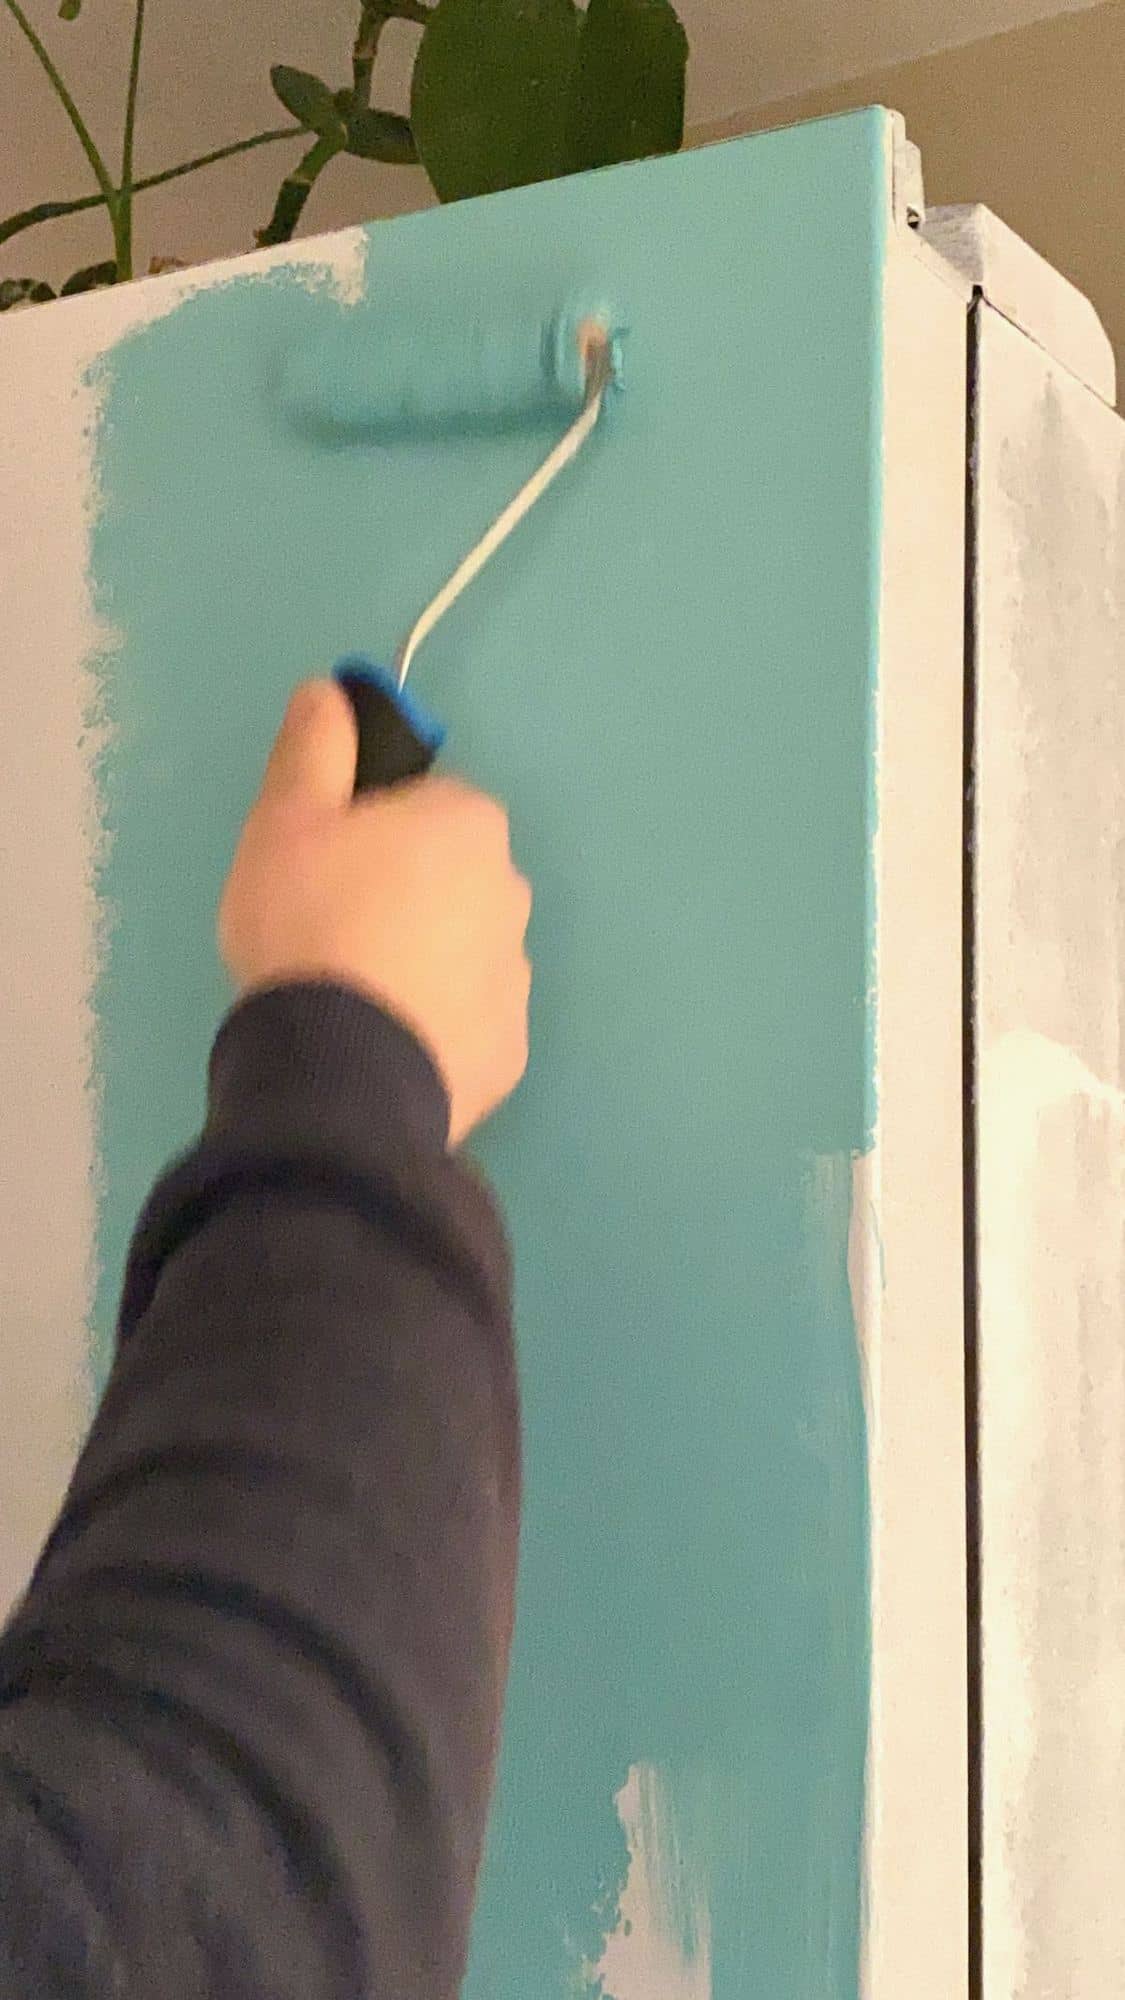 Painting the door of a fridge with a roller brush